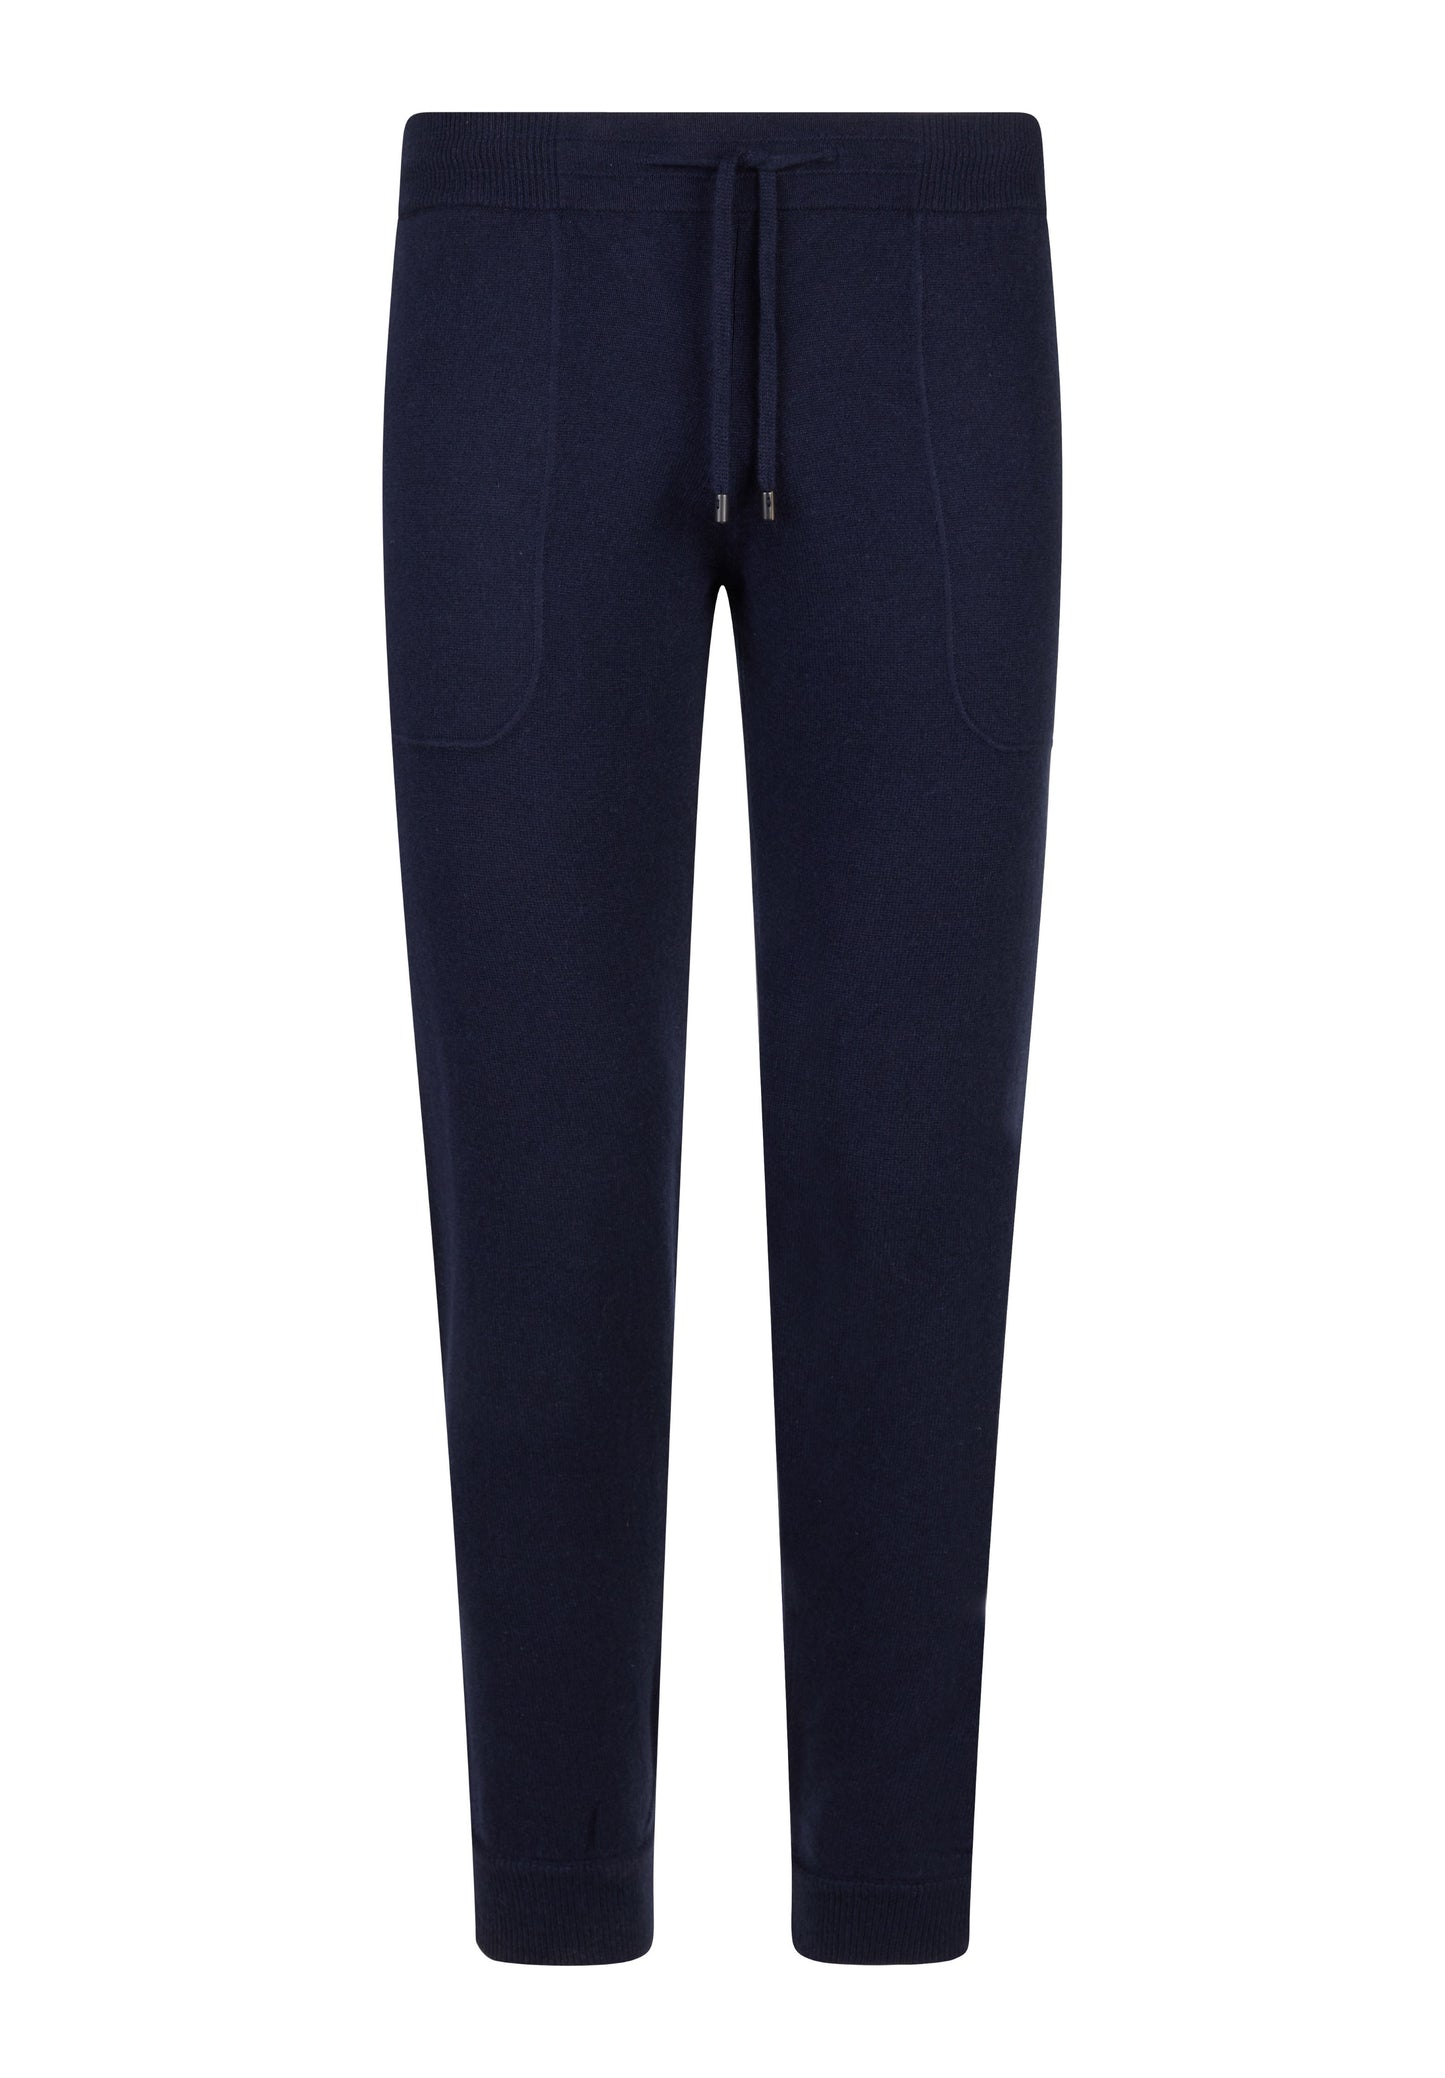 Blue jogging trousers with ribbed bottom